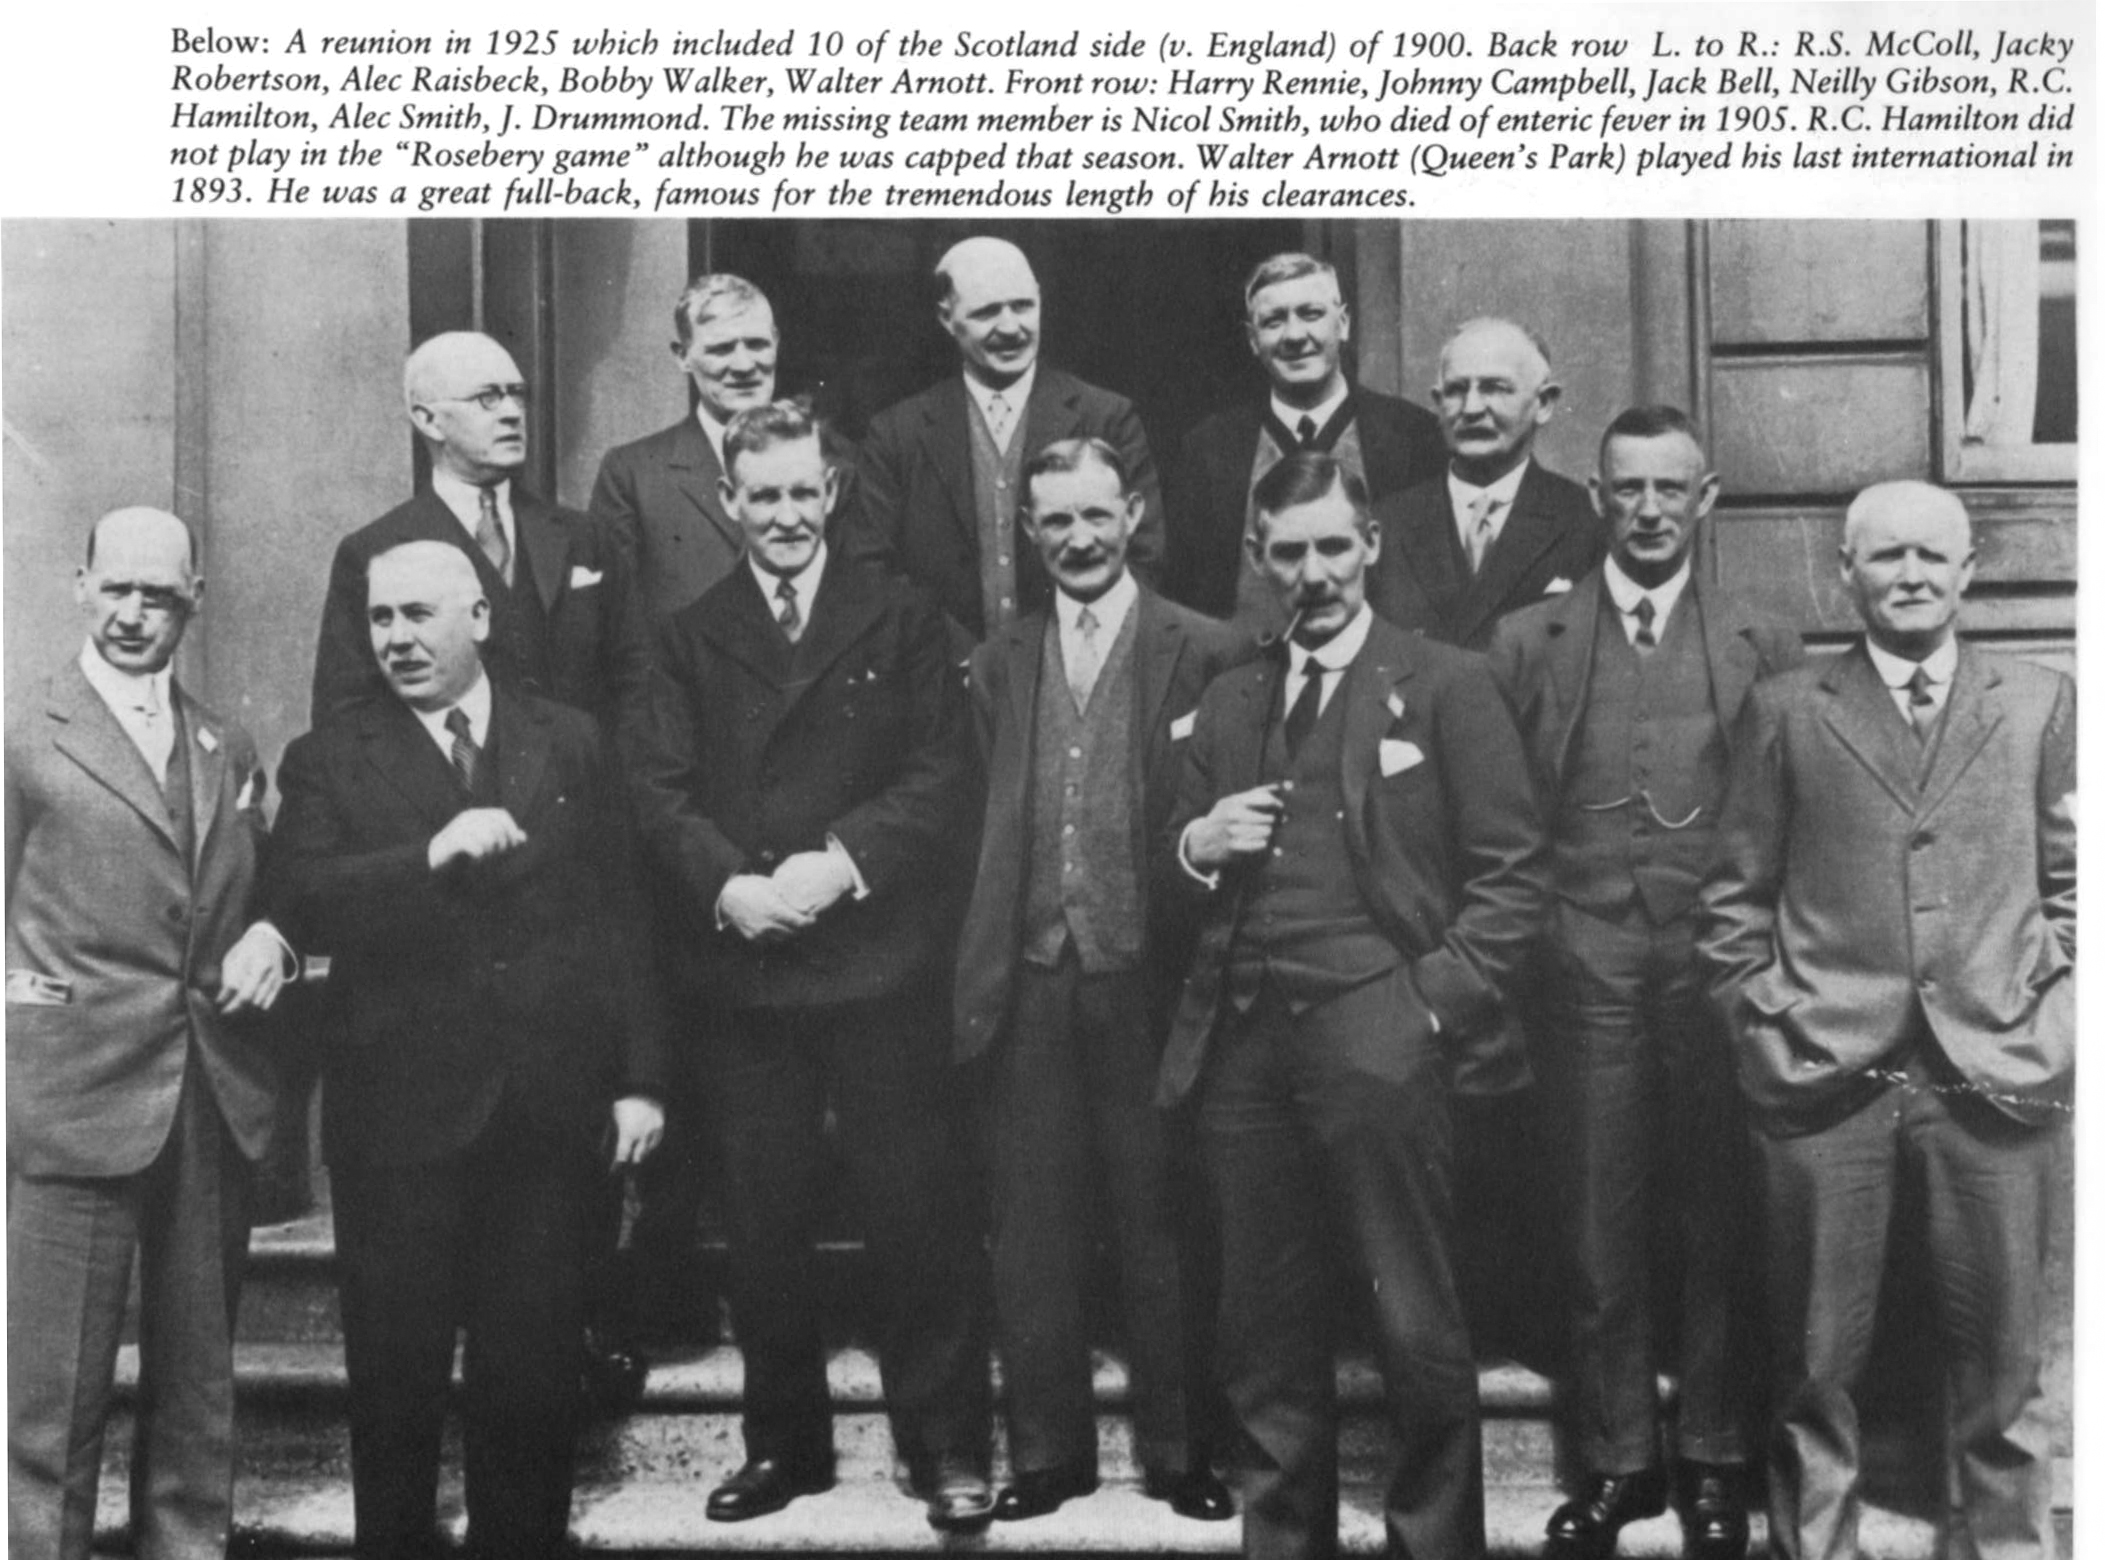 Soctland 1900 team reunion in 1925 including Bobby Walker and Harry Rennie